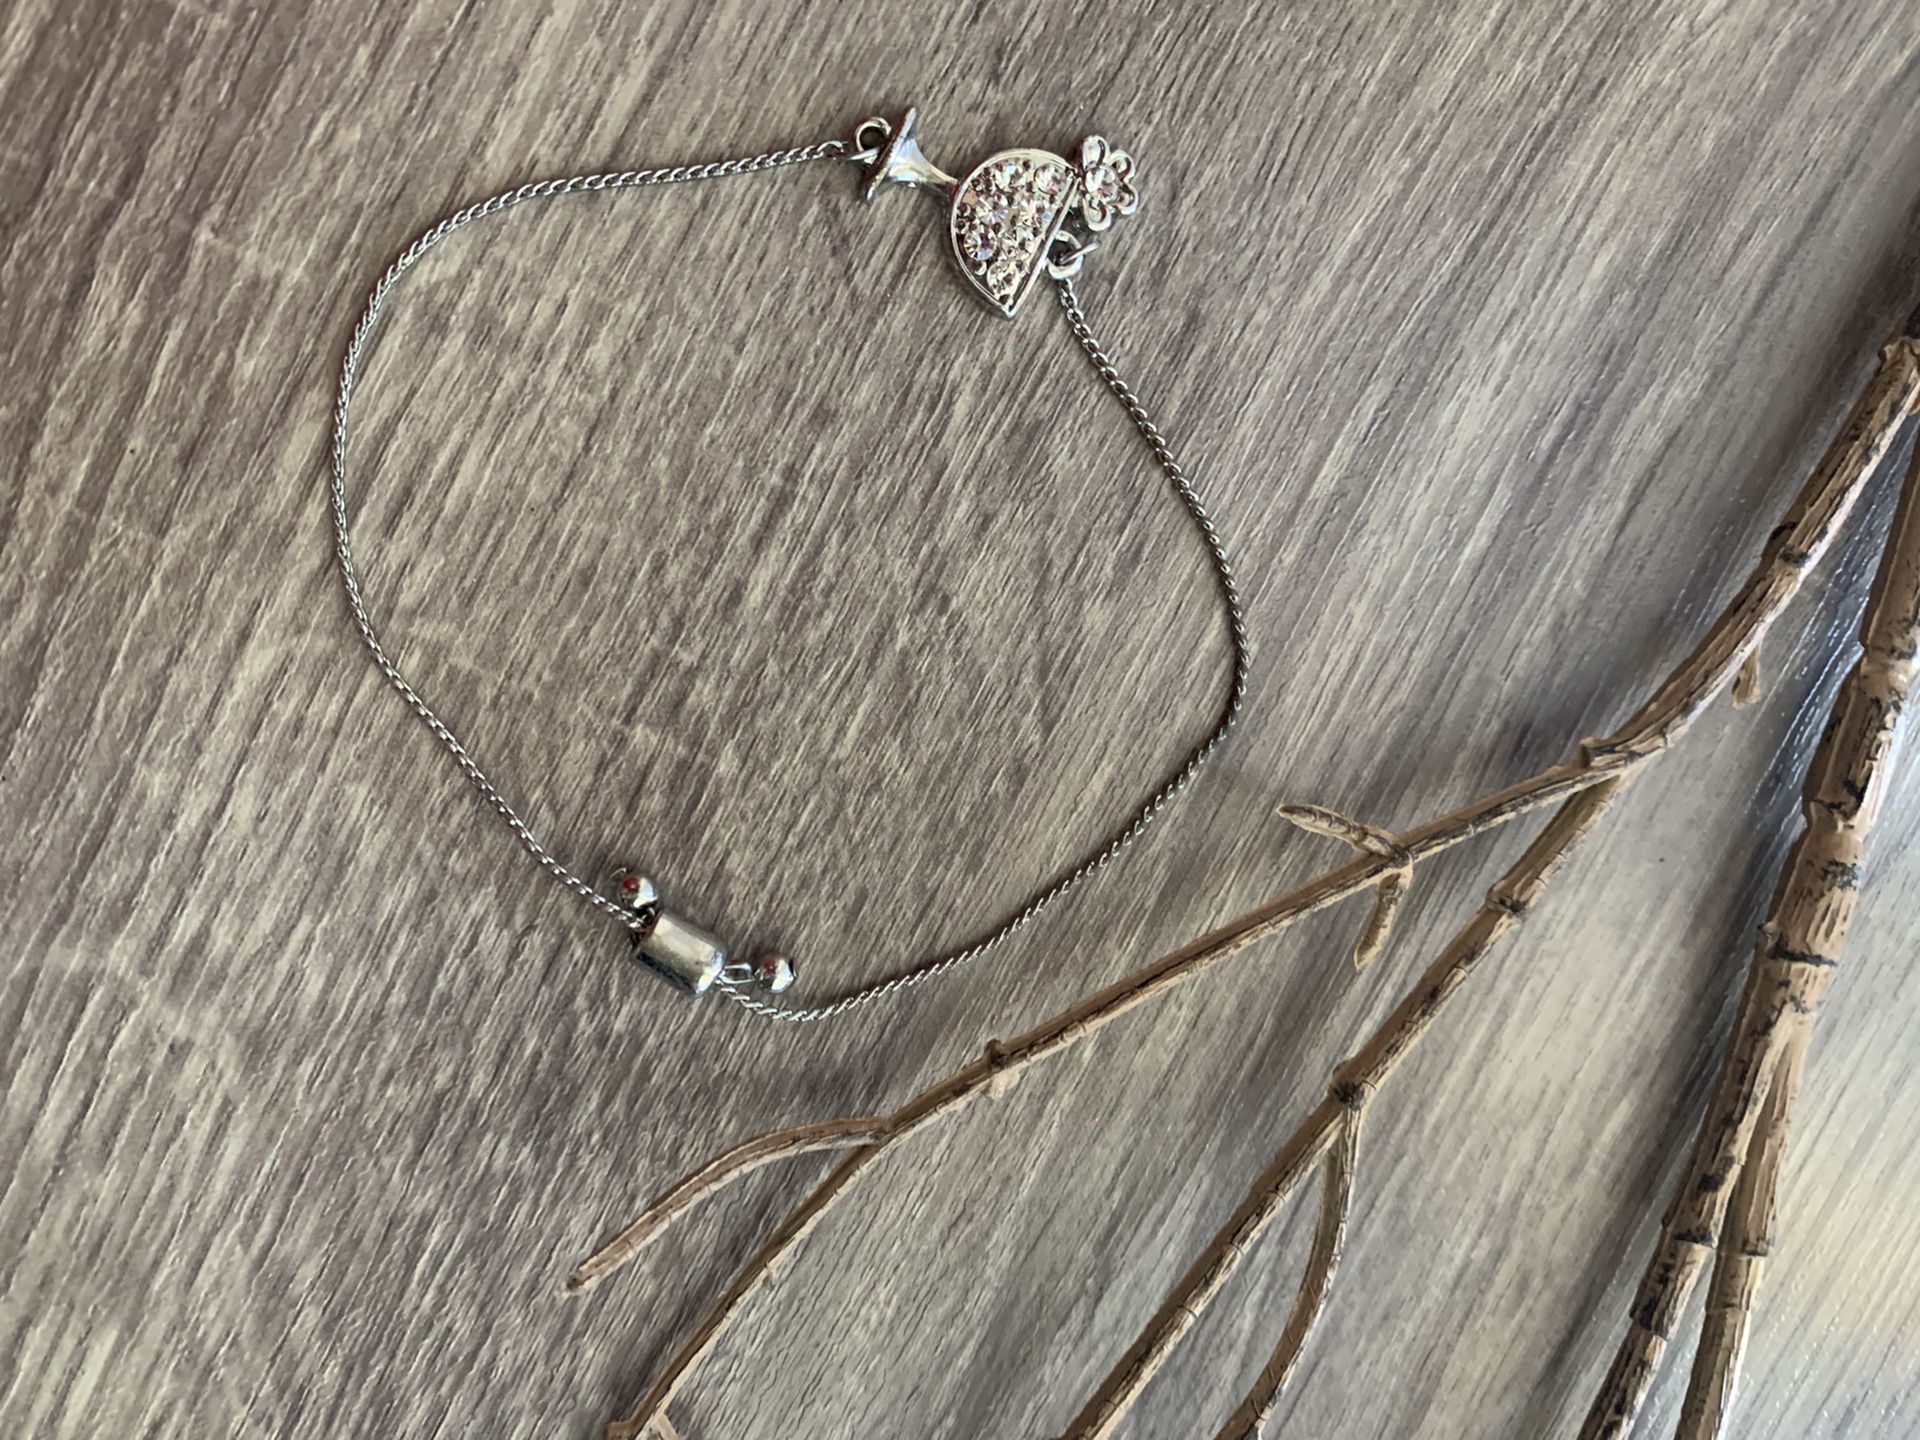 Silver color bracelet with tropical drink/margarita charm